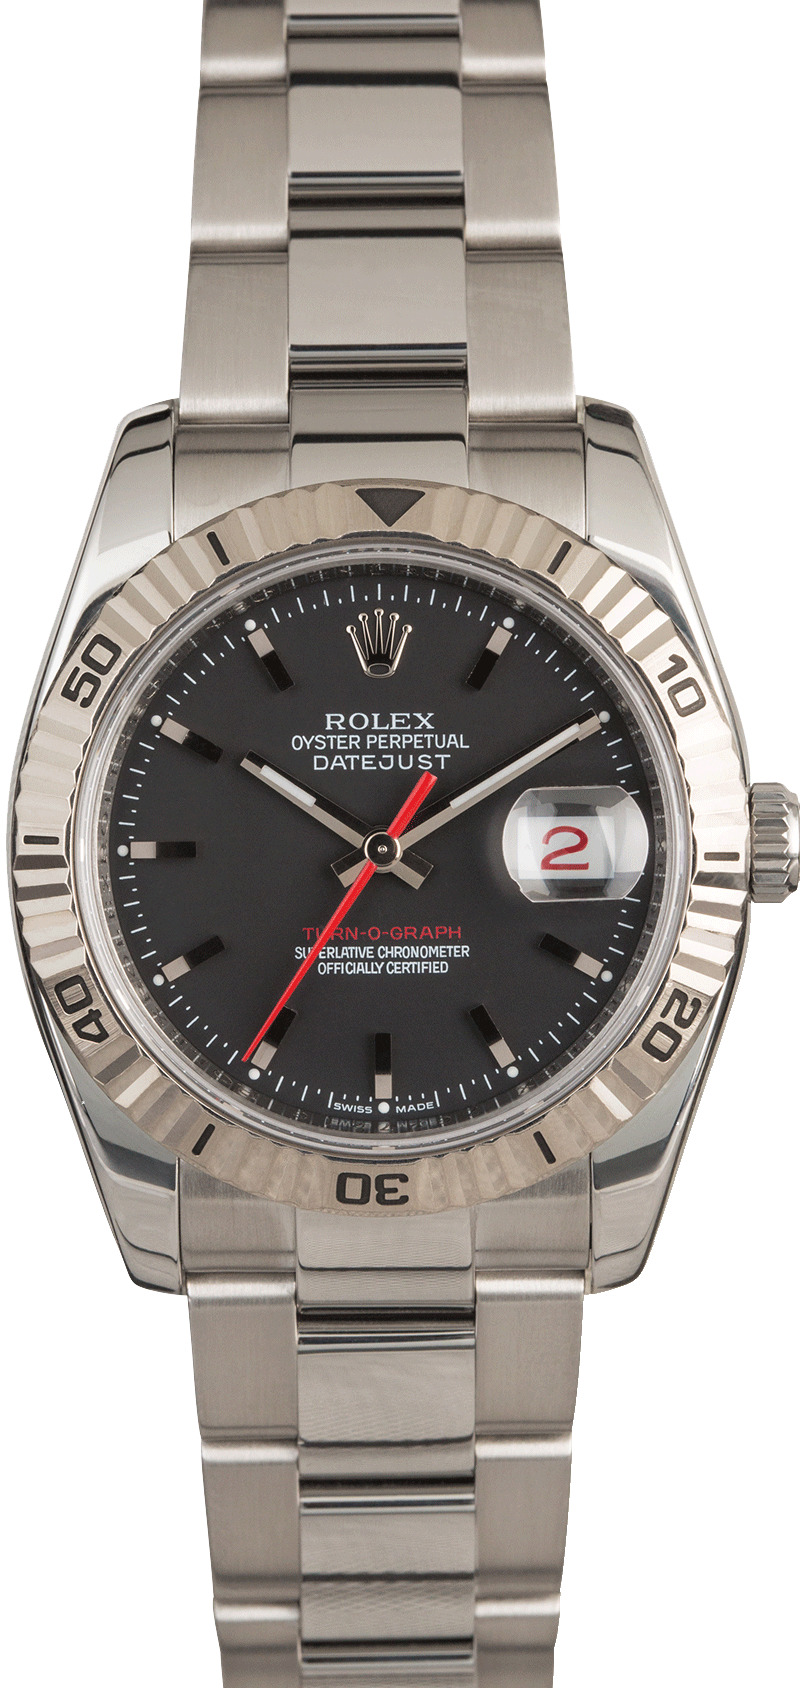 datejust with red date